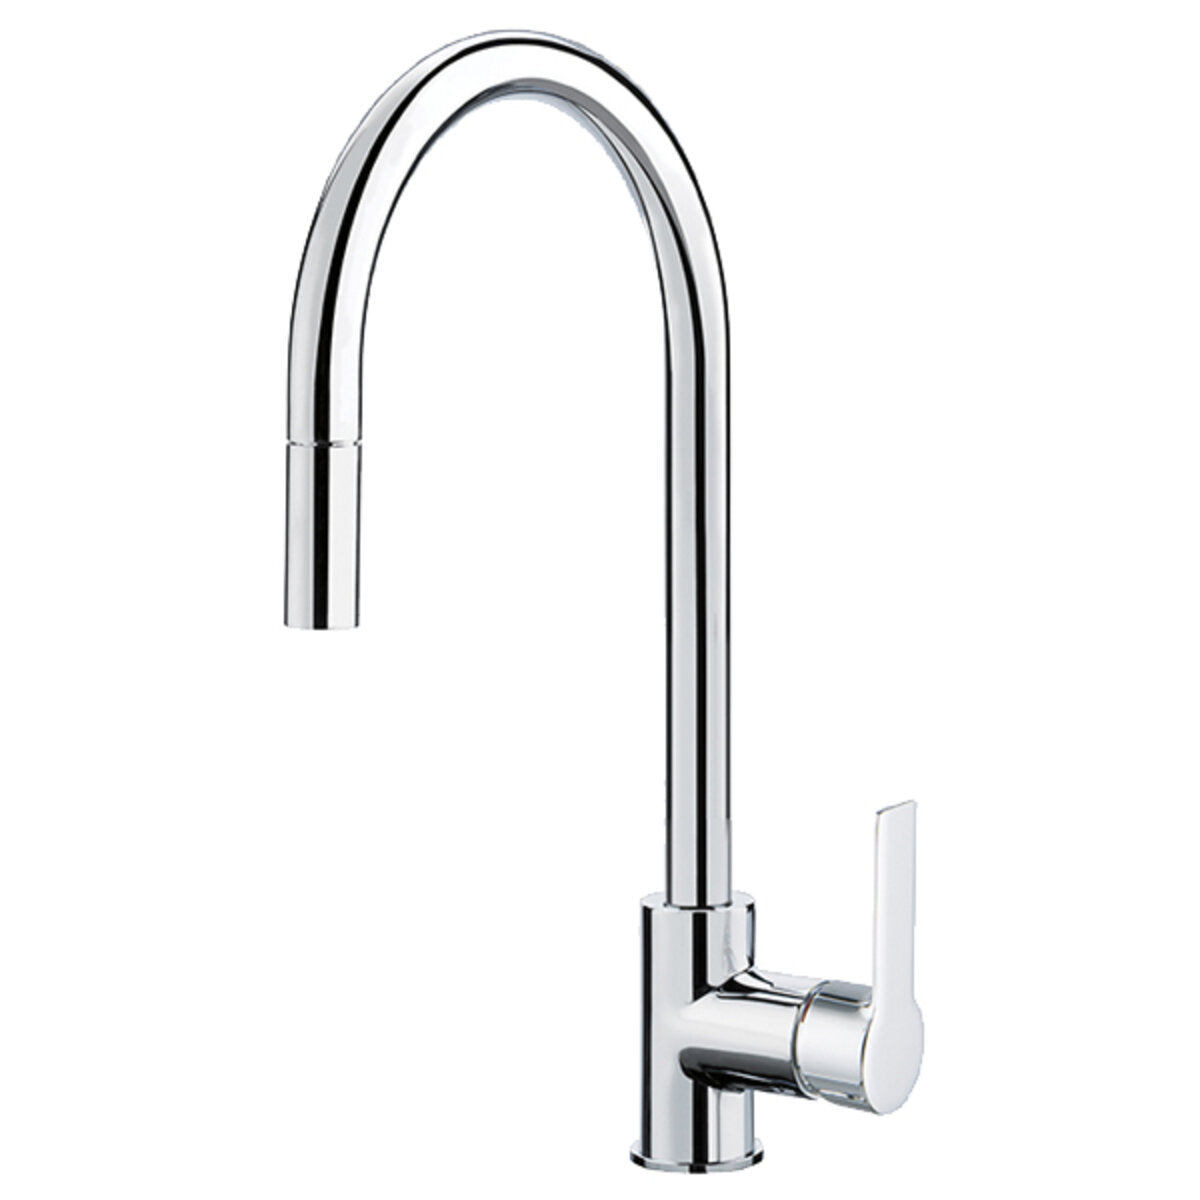 Fima Carlo Frattini Kitchen Series kitchen sink mixer installation on top Pull-out shower